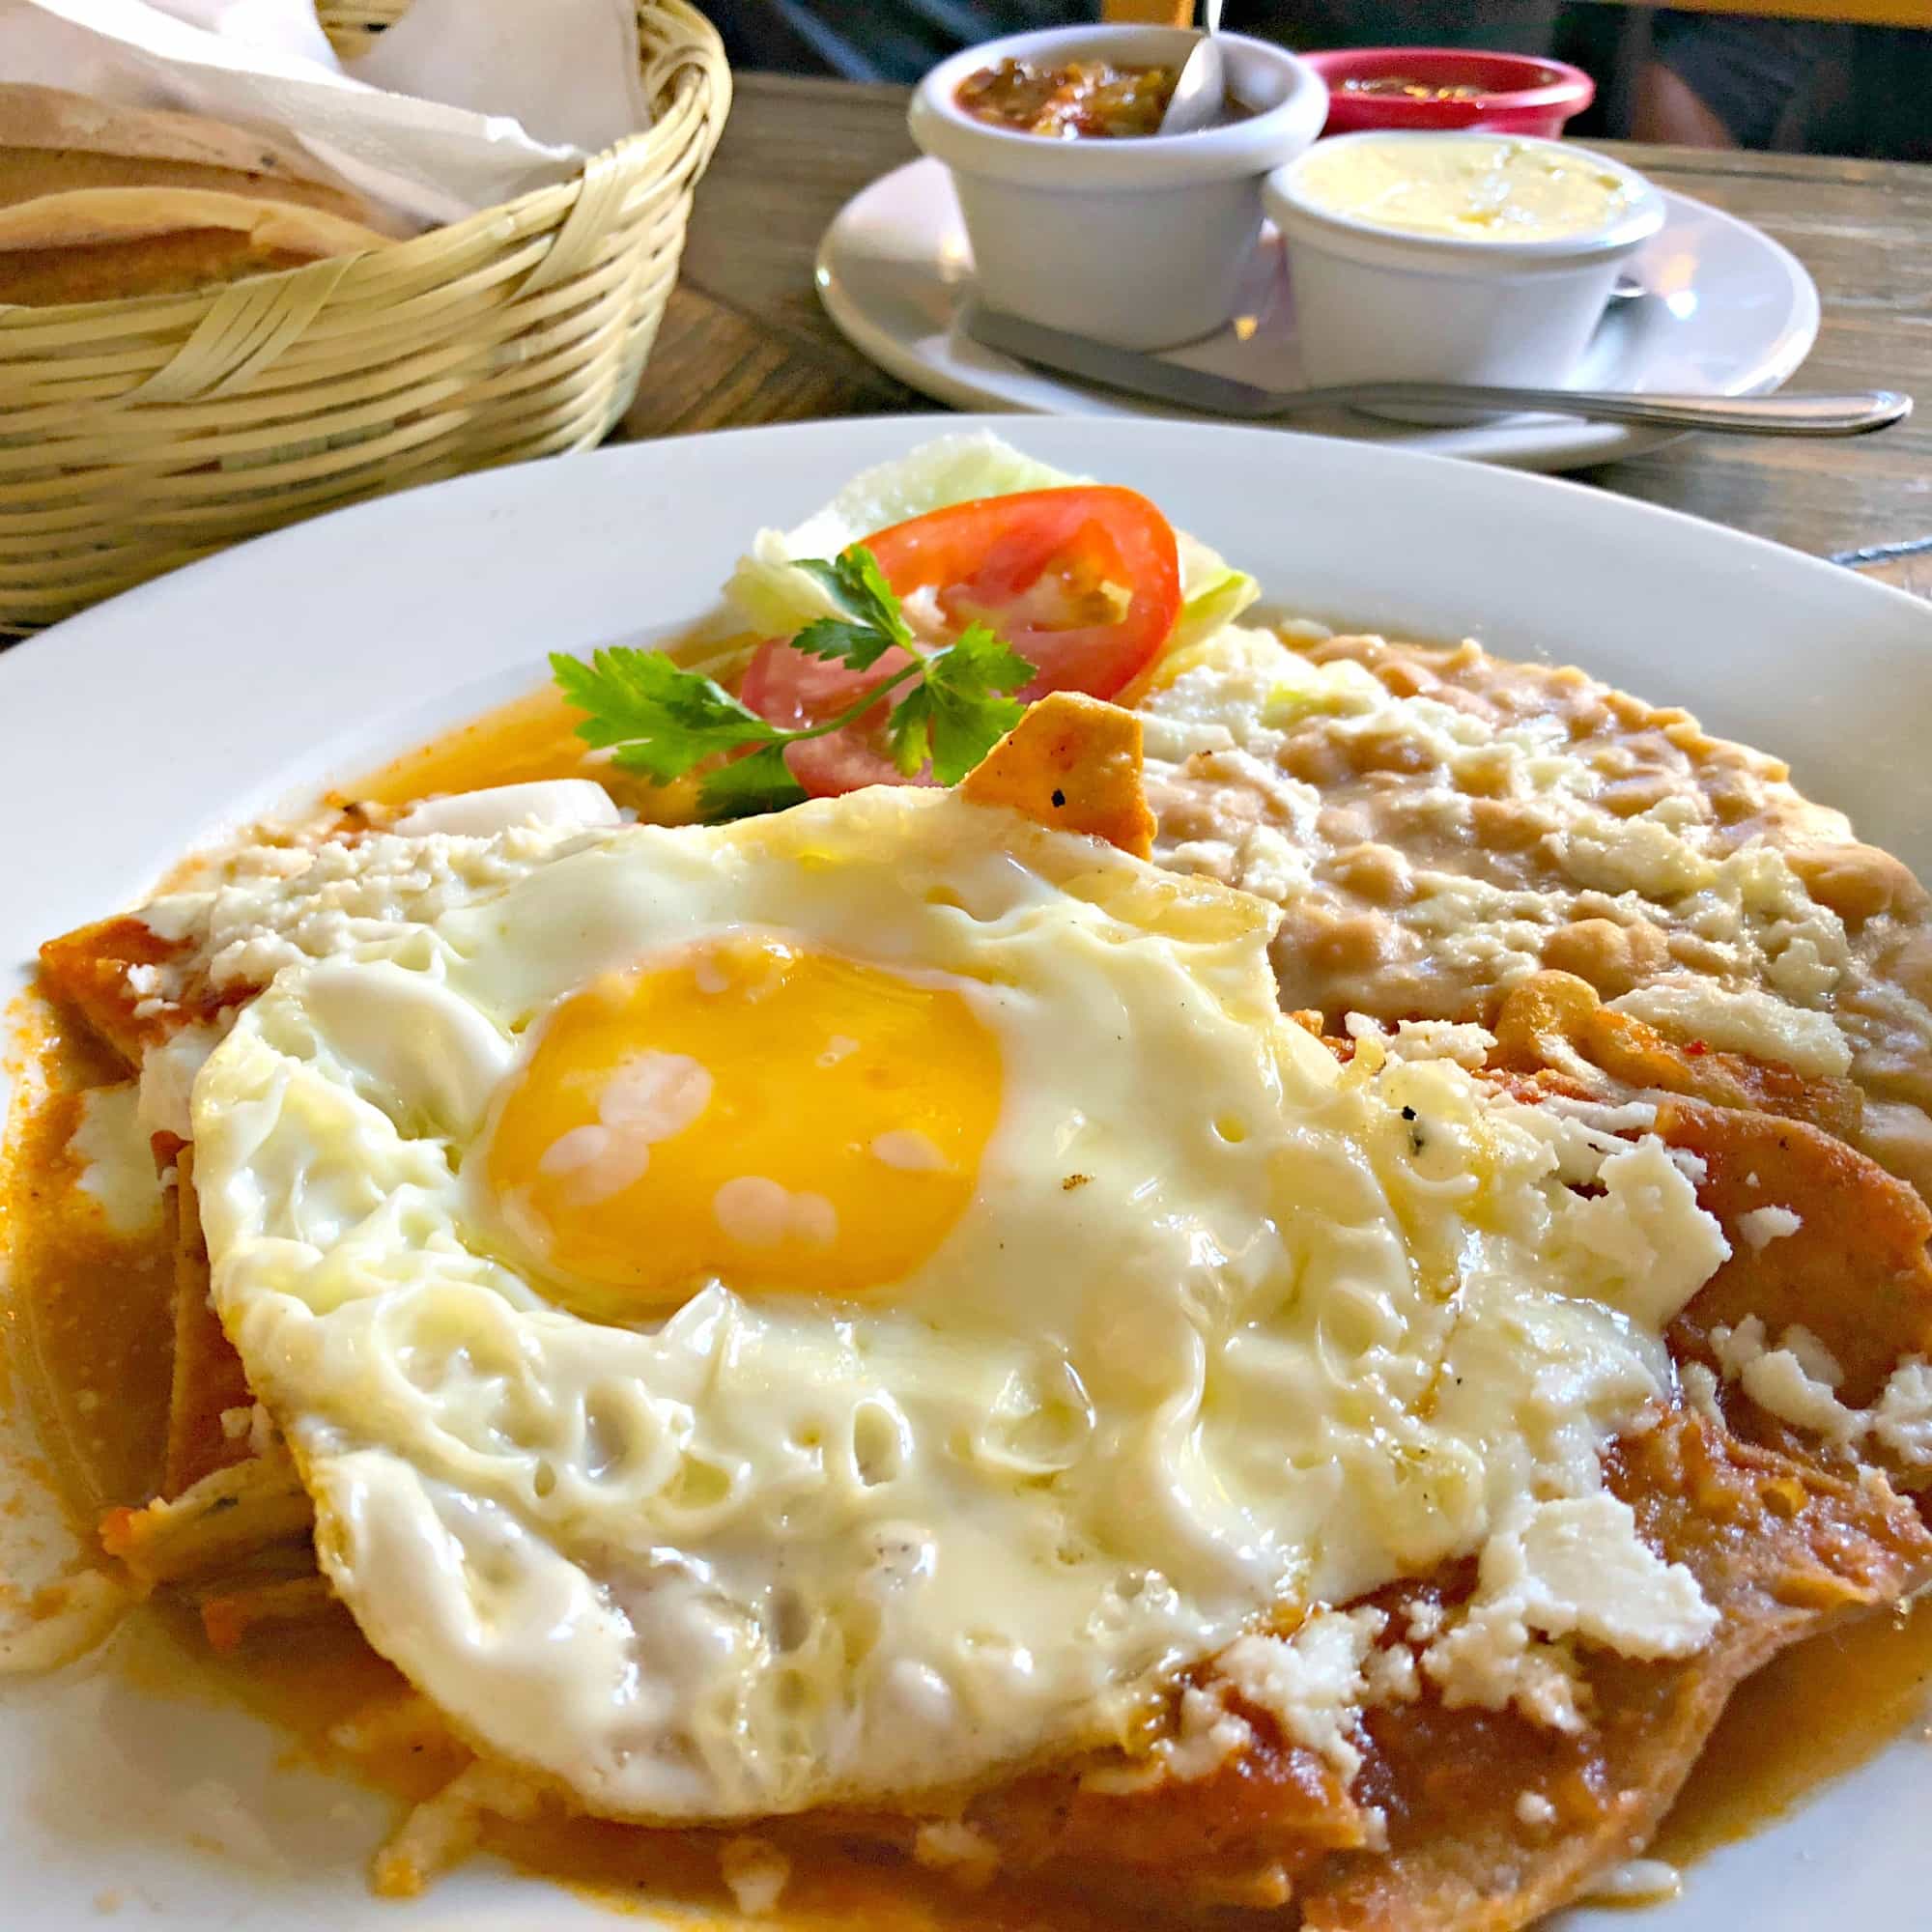 For the best chilaquiles in San Miguel de Allende, head to Rincon de Don Tomas